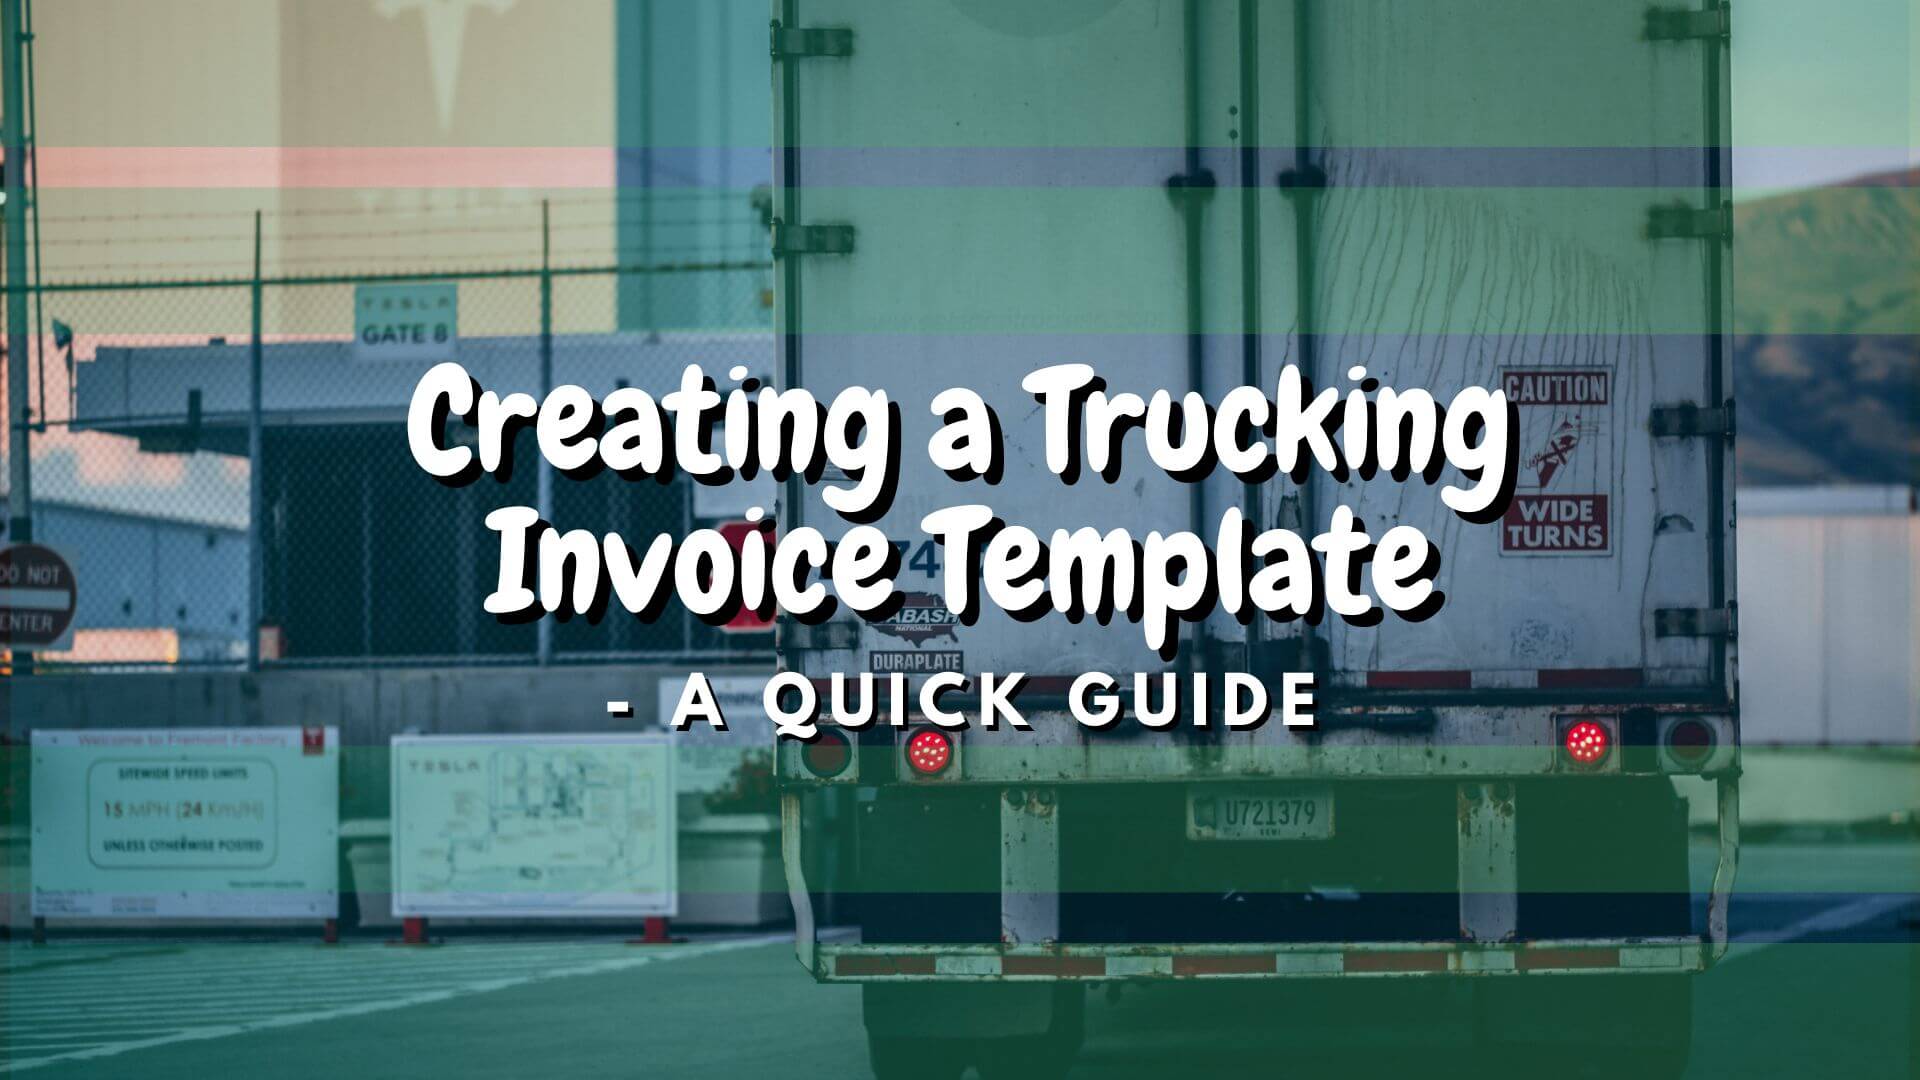 As a trucking company, you'll also need administrative tasks like invoicing. Here's how to create a trucking invoice template.